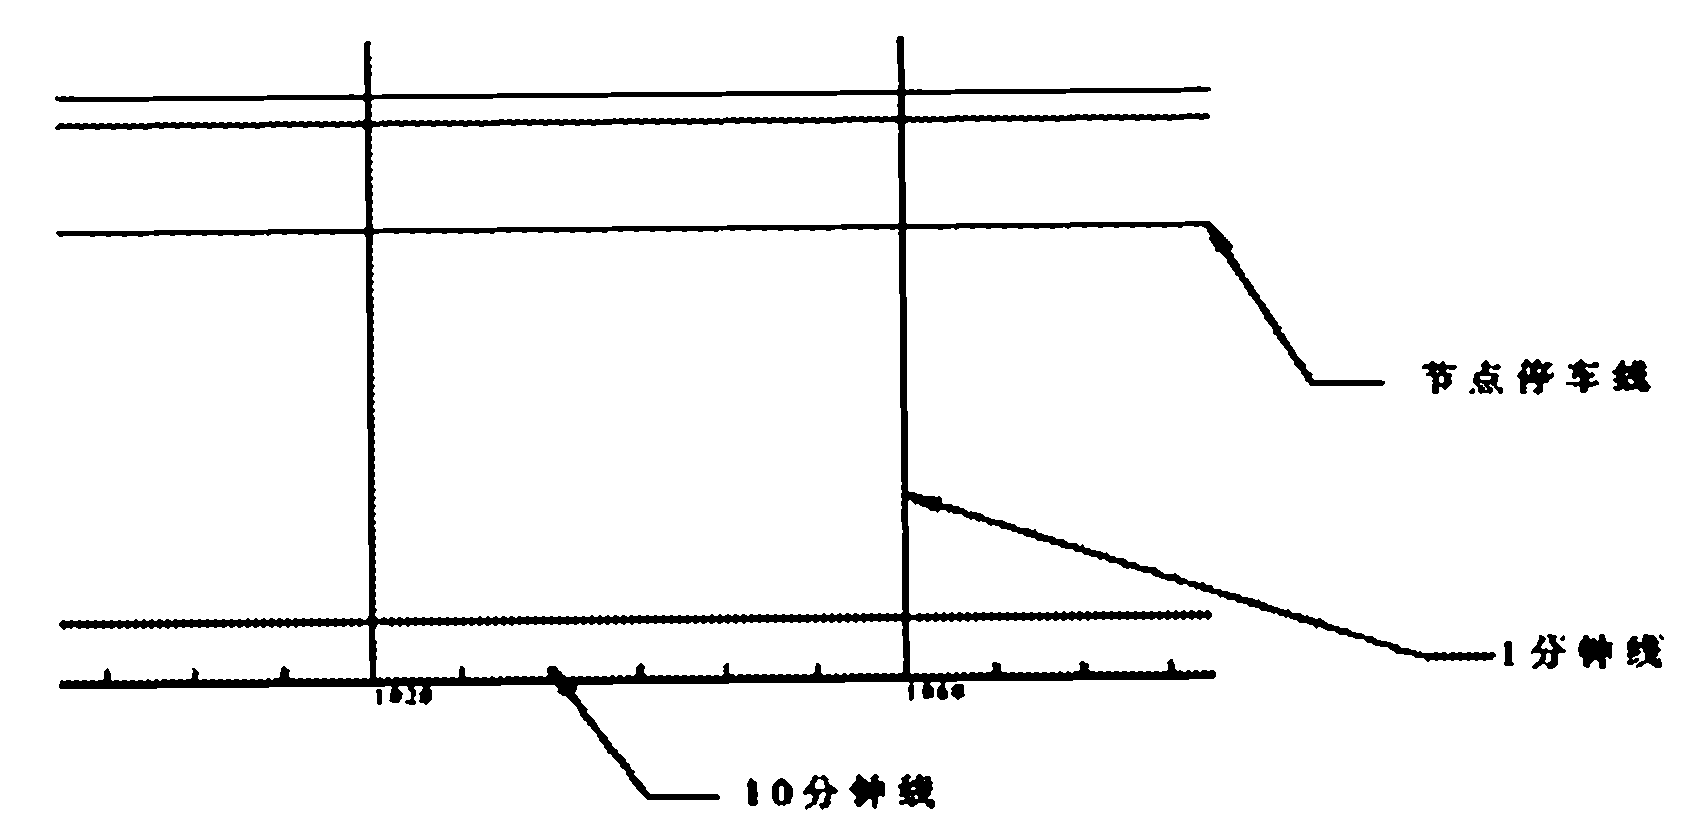 Method for illustrating bus-only lane interval operation capacity